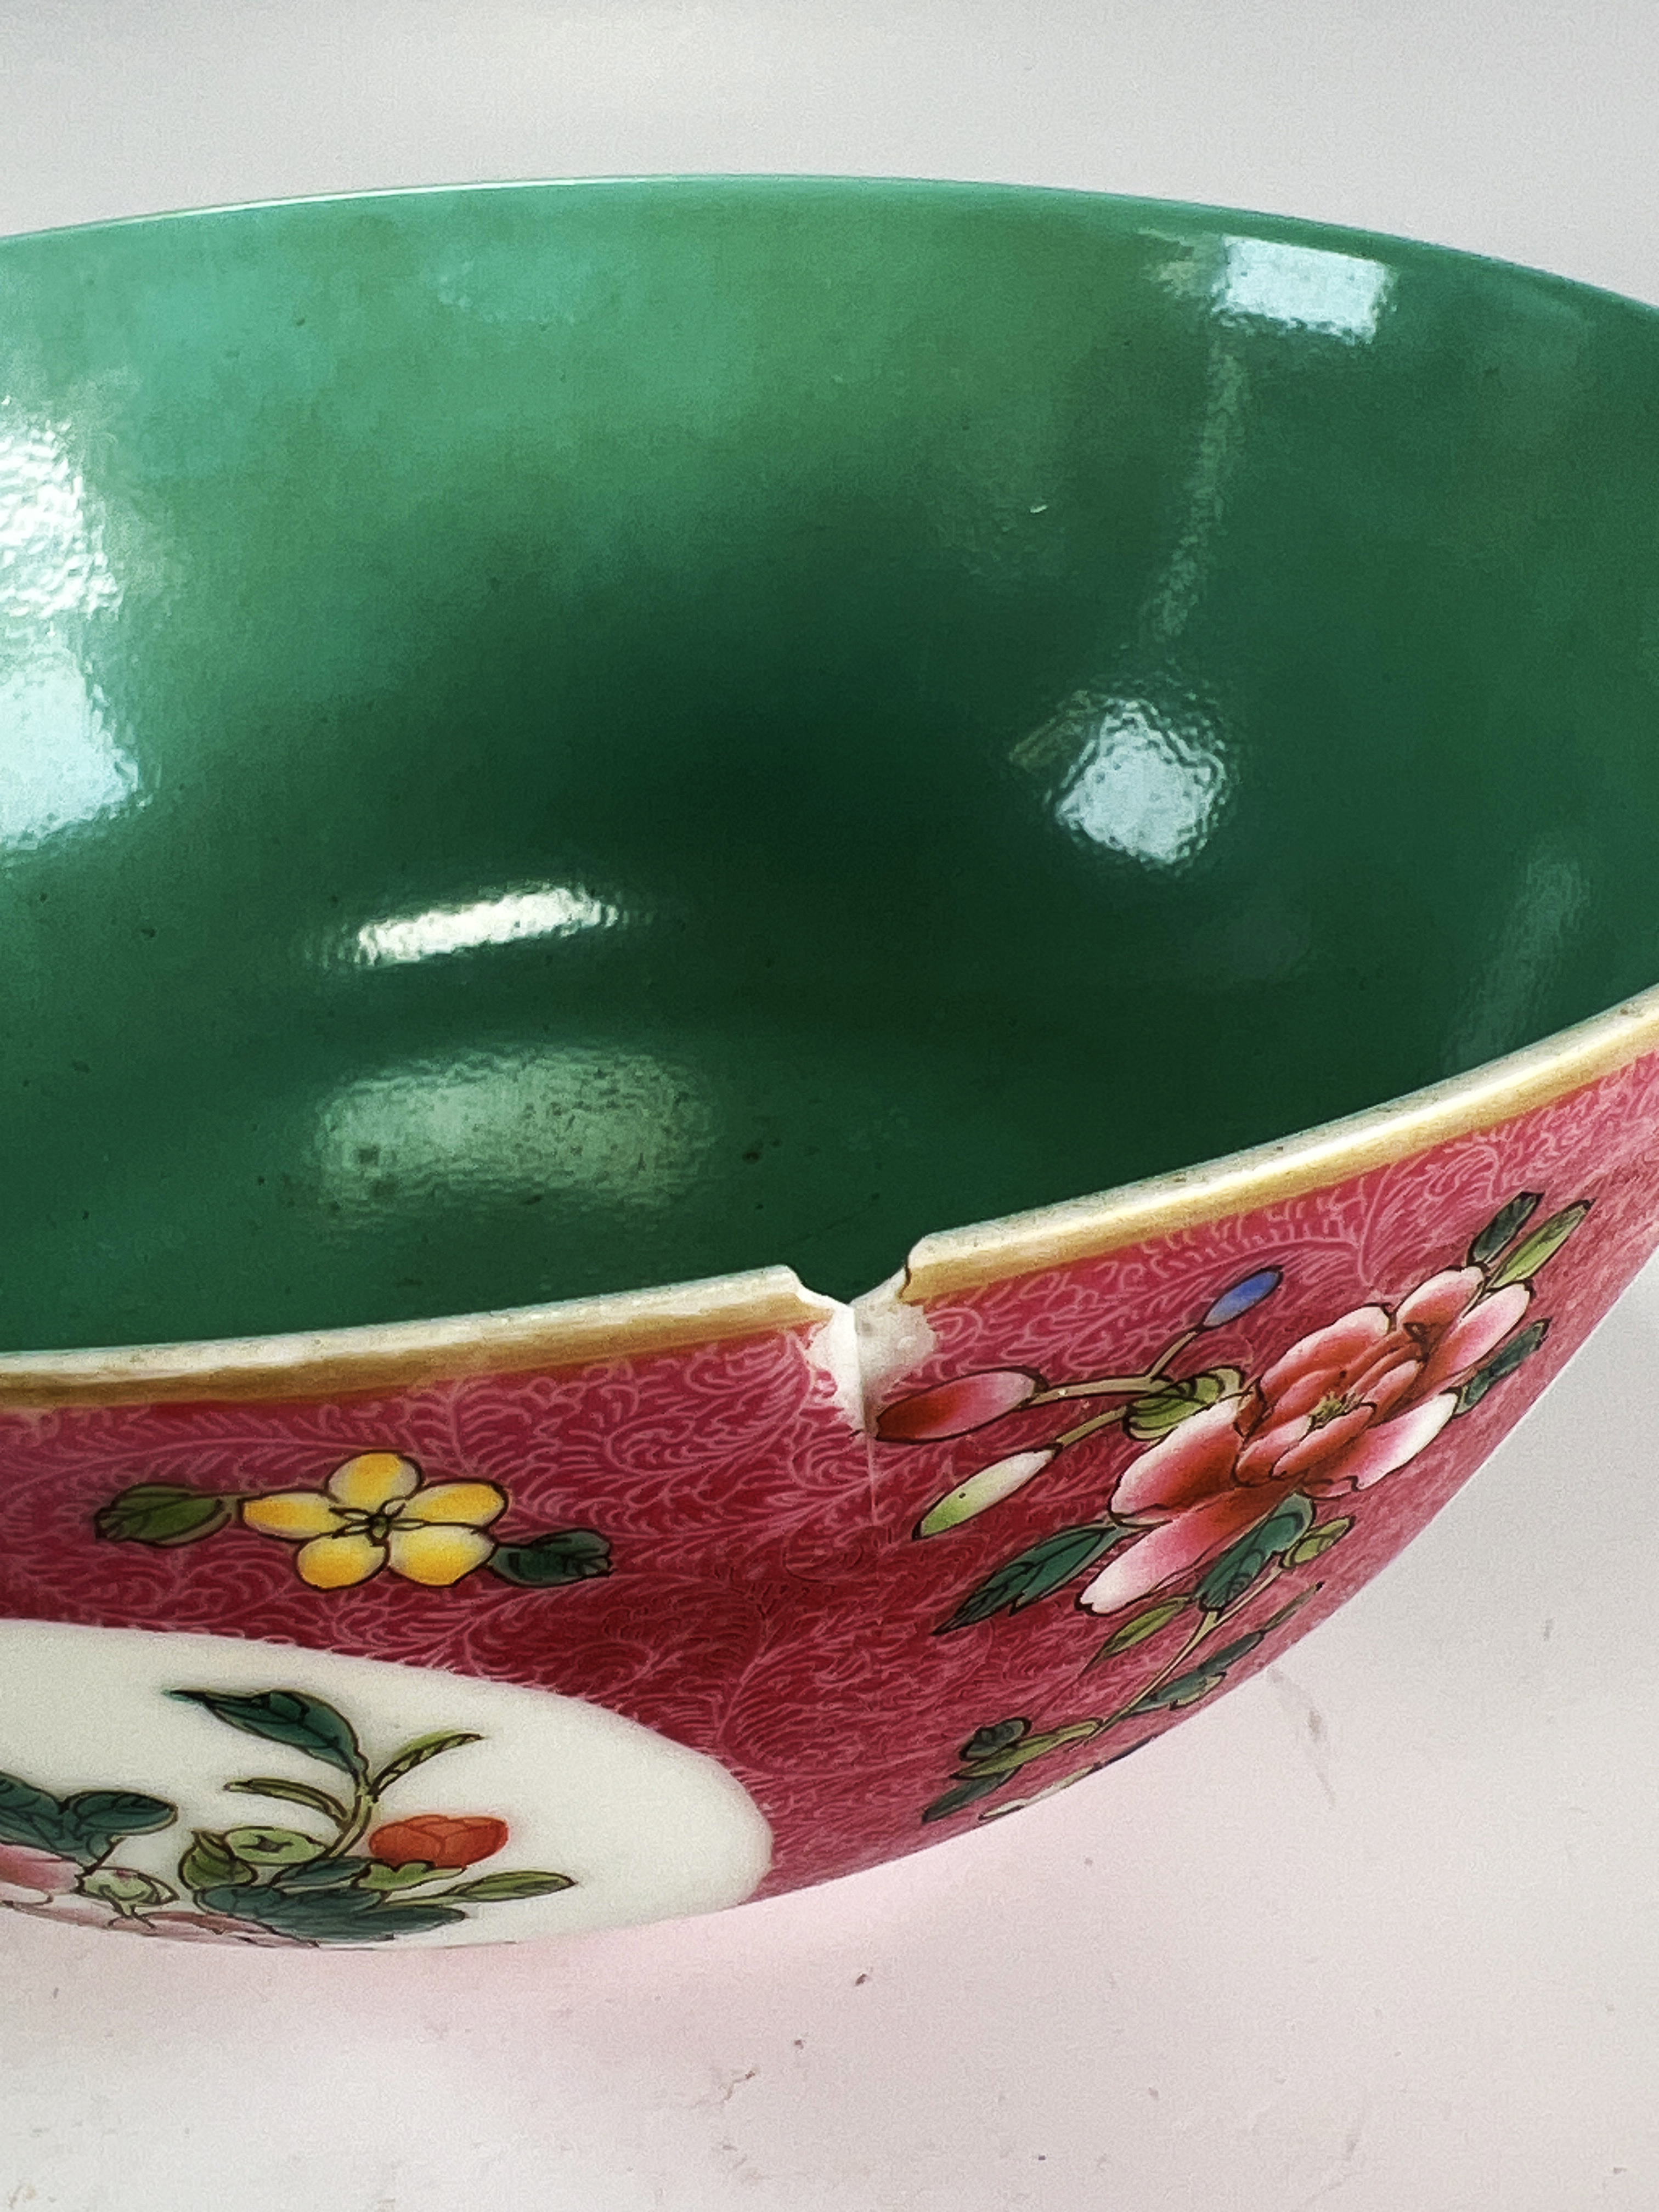 Exquisite Famille Rose Porcelain Bowl - A Chinese Treasure image 4